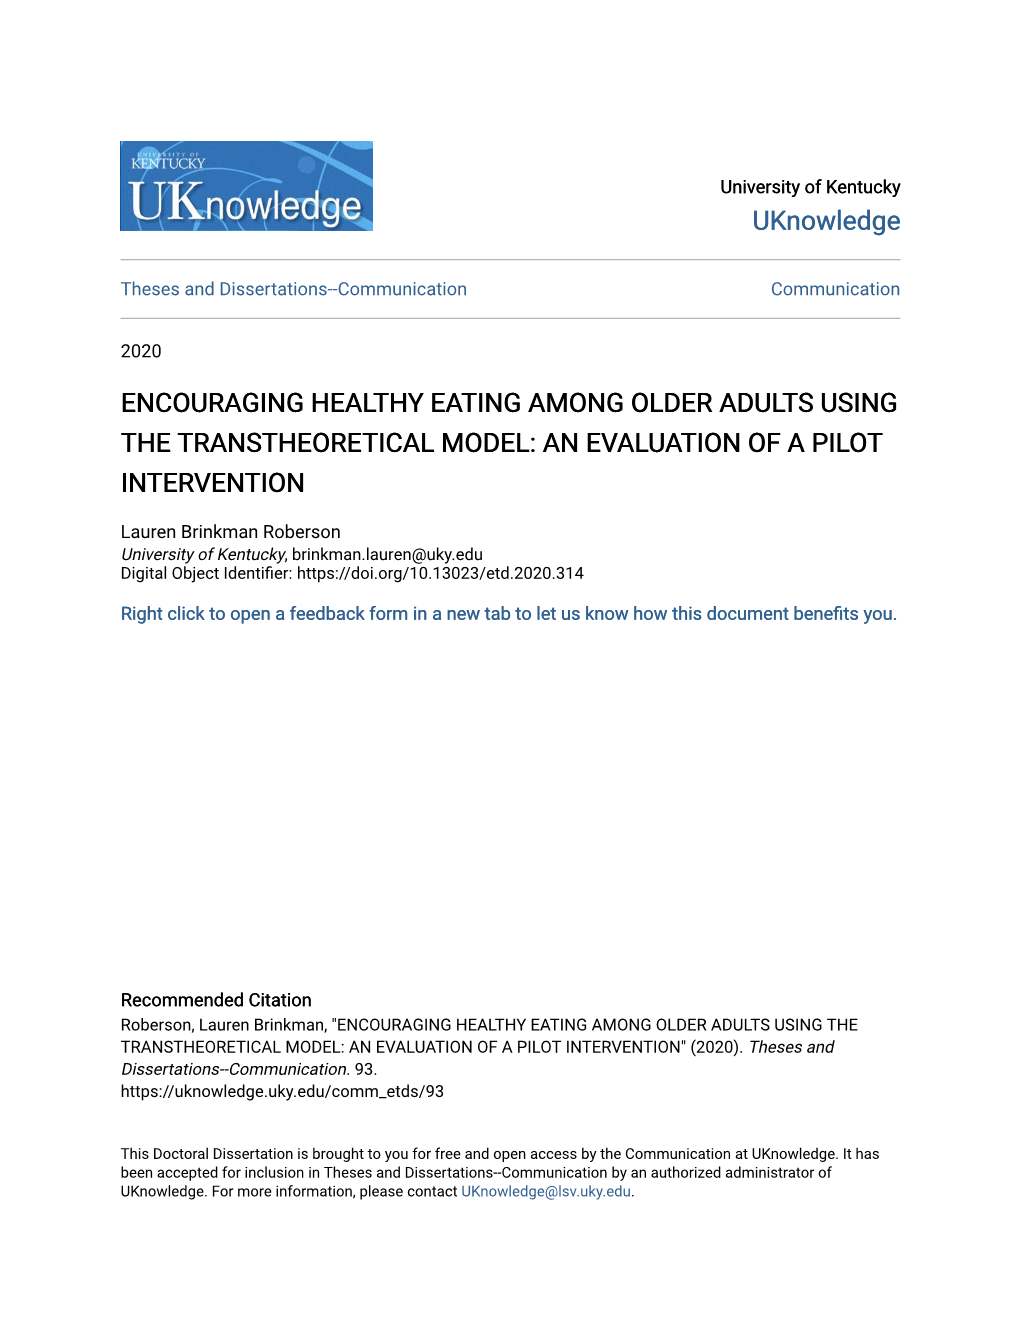 Encouraging Healthy Eating Among Older Adults Using the Transtheoretical Model: an Evaluation of a Pilot Intervention